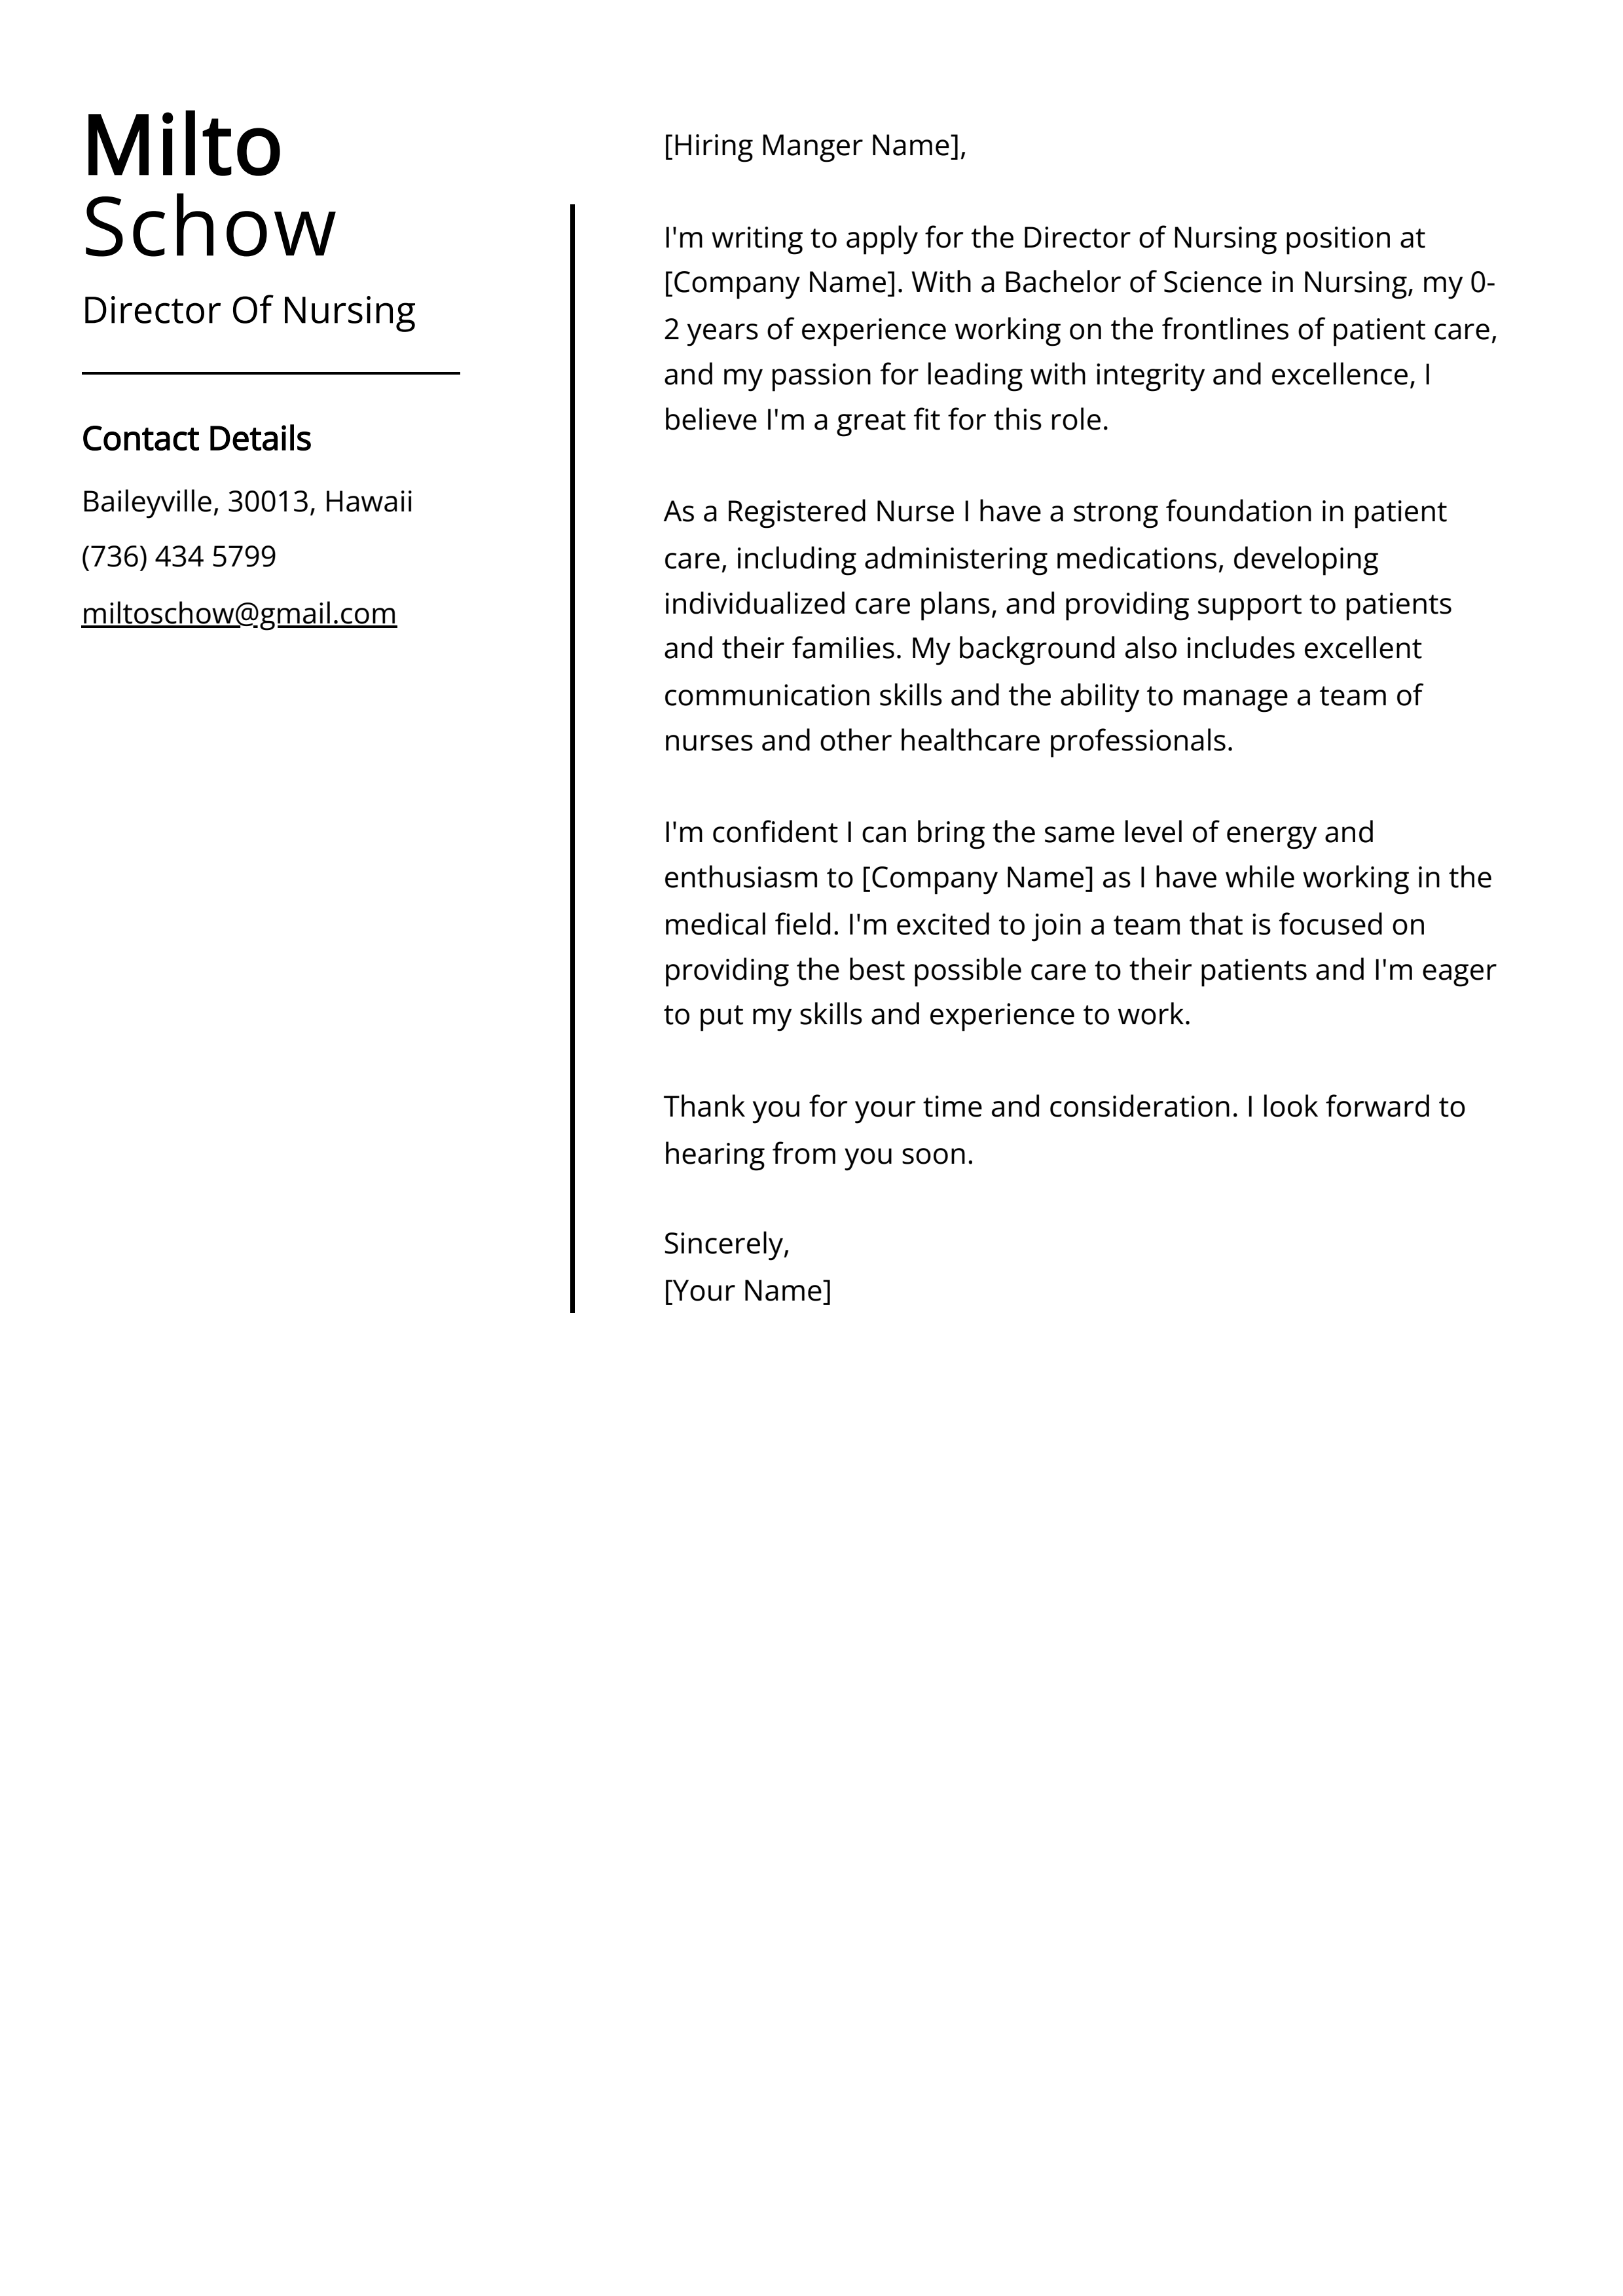 Director Of Nursing Cover Letter Example